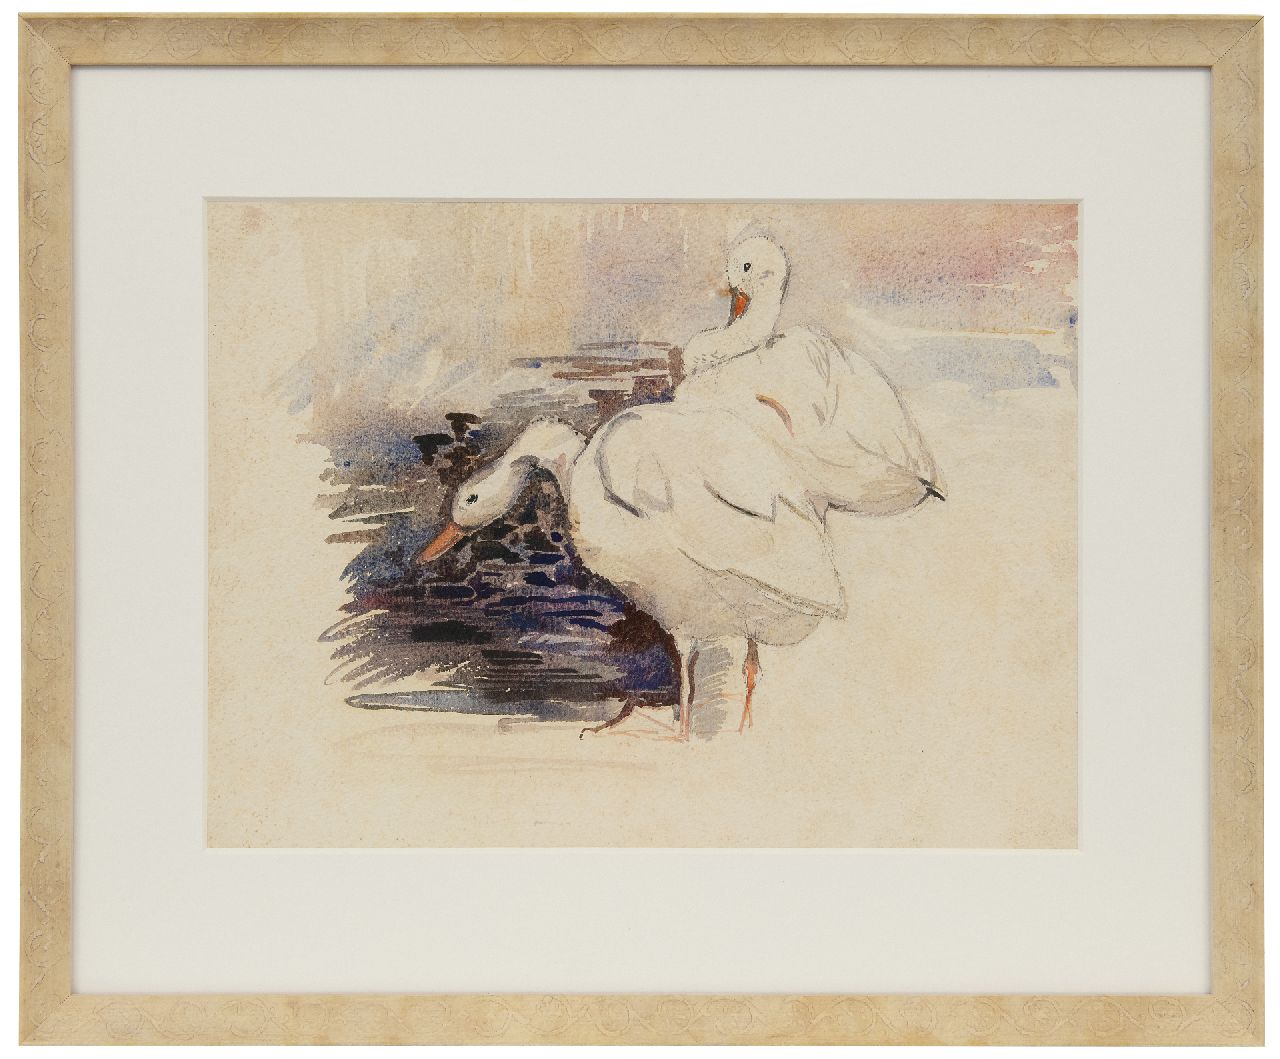 Bruigom M.C.  | Margaretha Cornelia 'Greta' Bruigom | Watercolours and drawings offered for sale | A pair of swans, watercolour on paper 26.0 x 35.0 cm